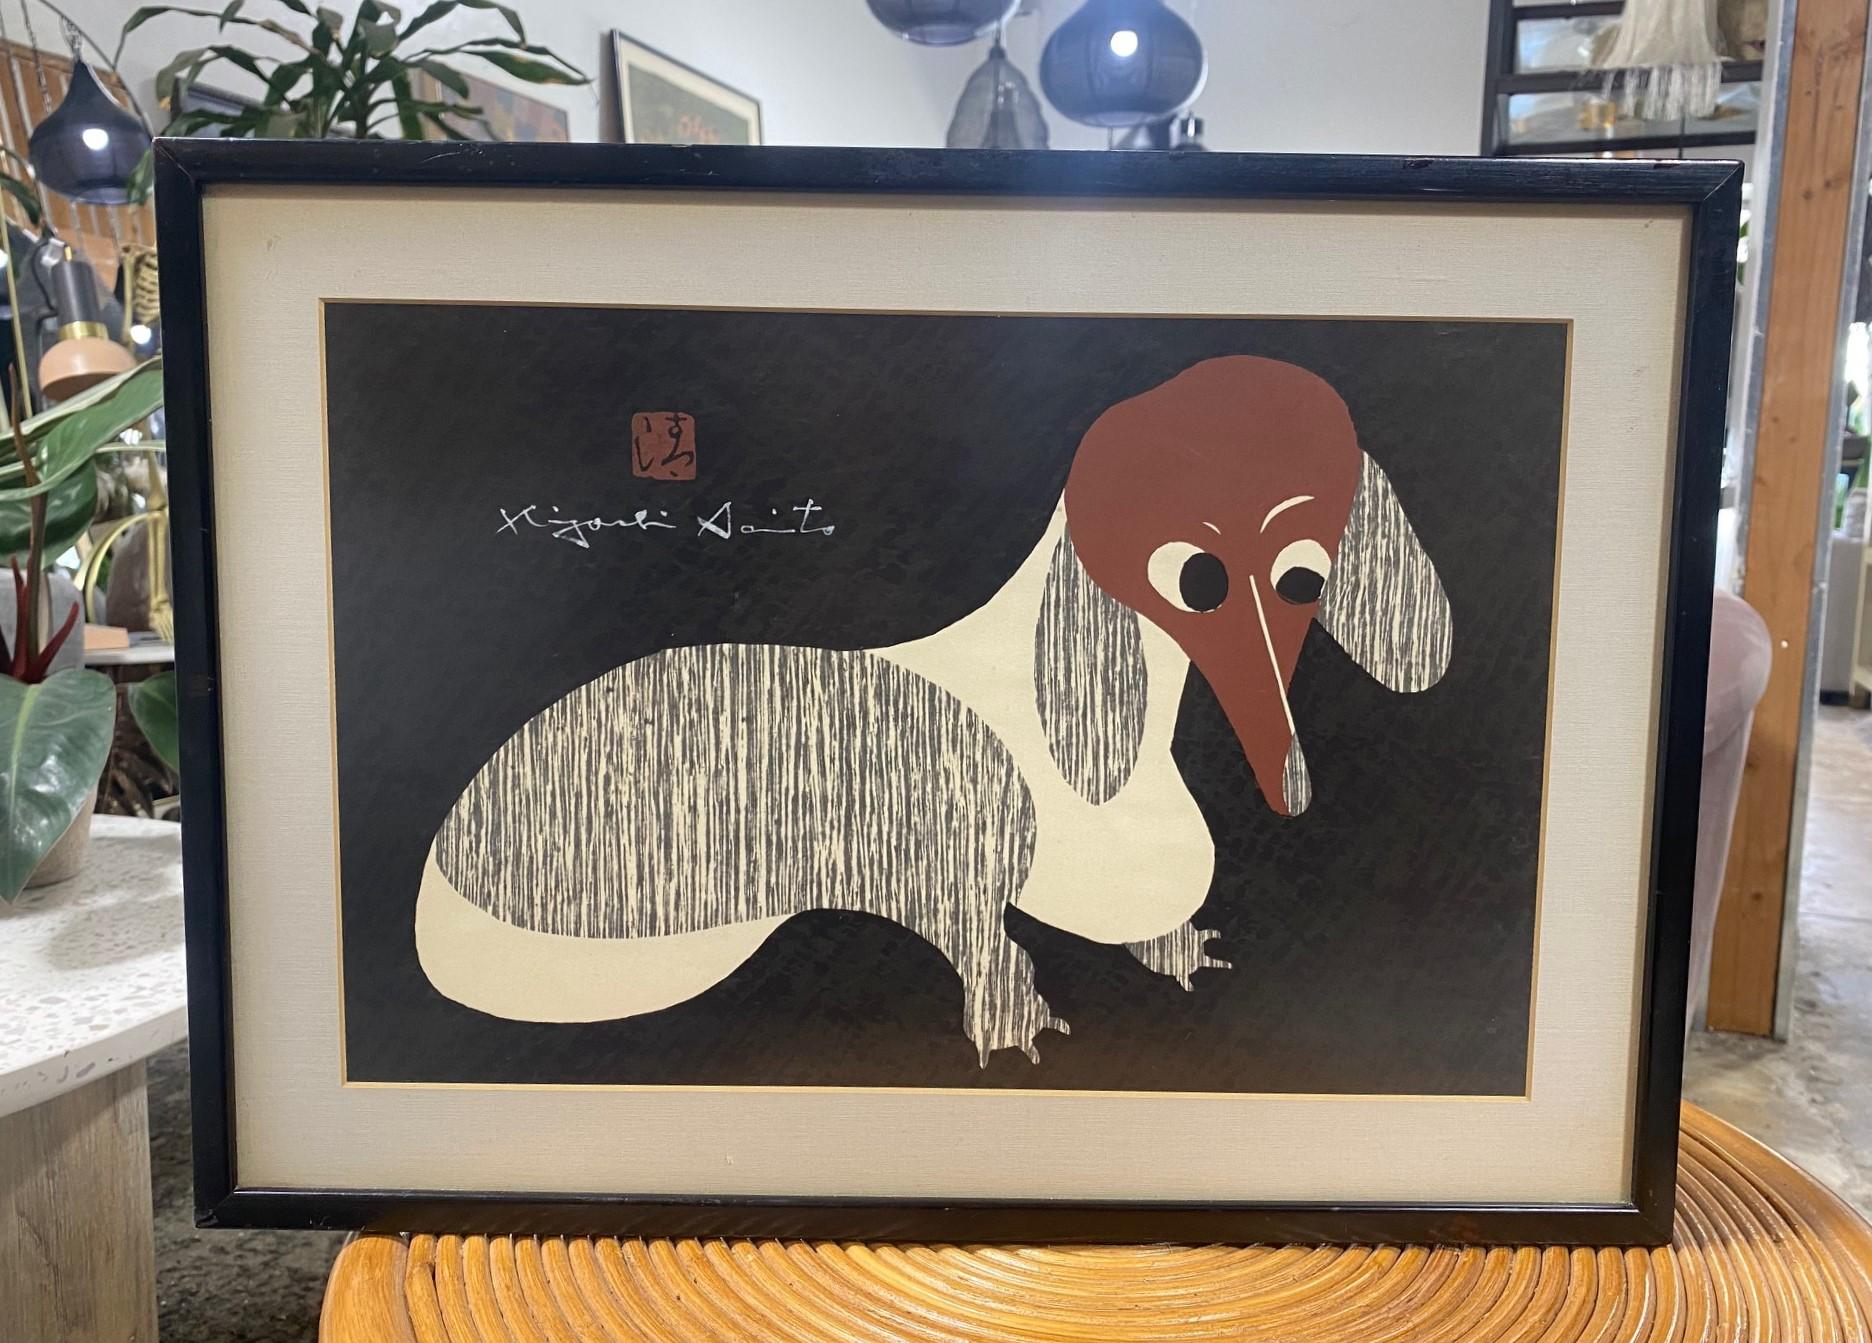 This beautifully and playfully composed woodblock print featuring a dachshund dog (also known as the wiener dog or sausage dog) is by famed Japanese master printmaker/artist Kiyoshi Saito. Many consider Saito to be one of the most important, if not